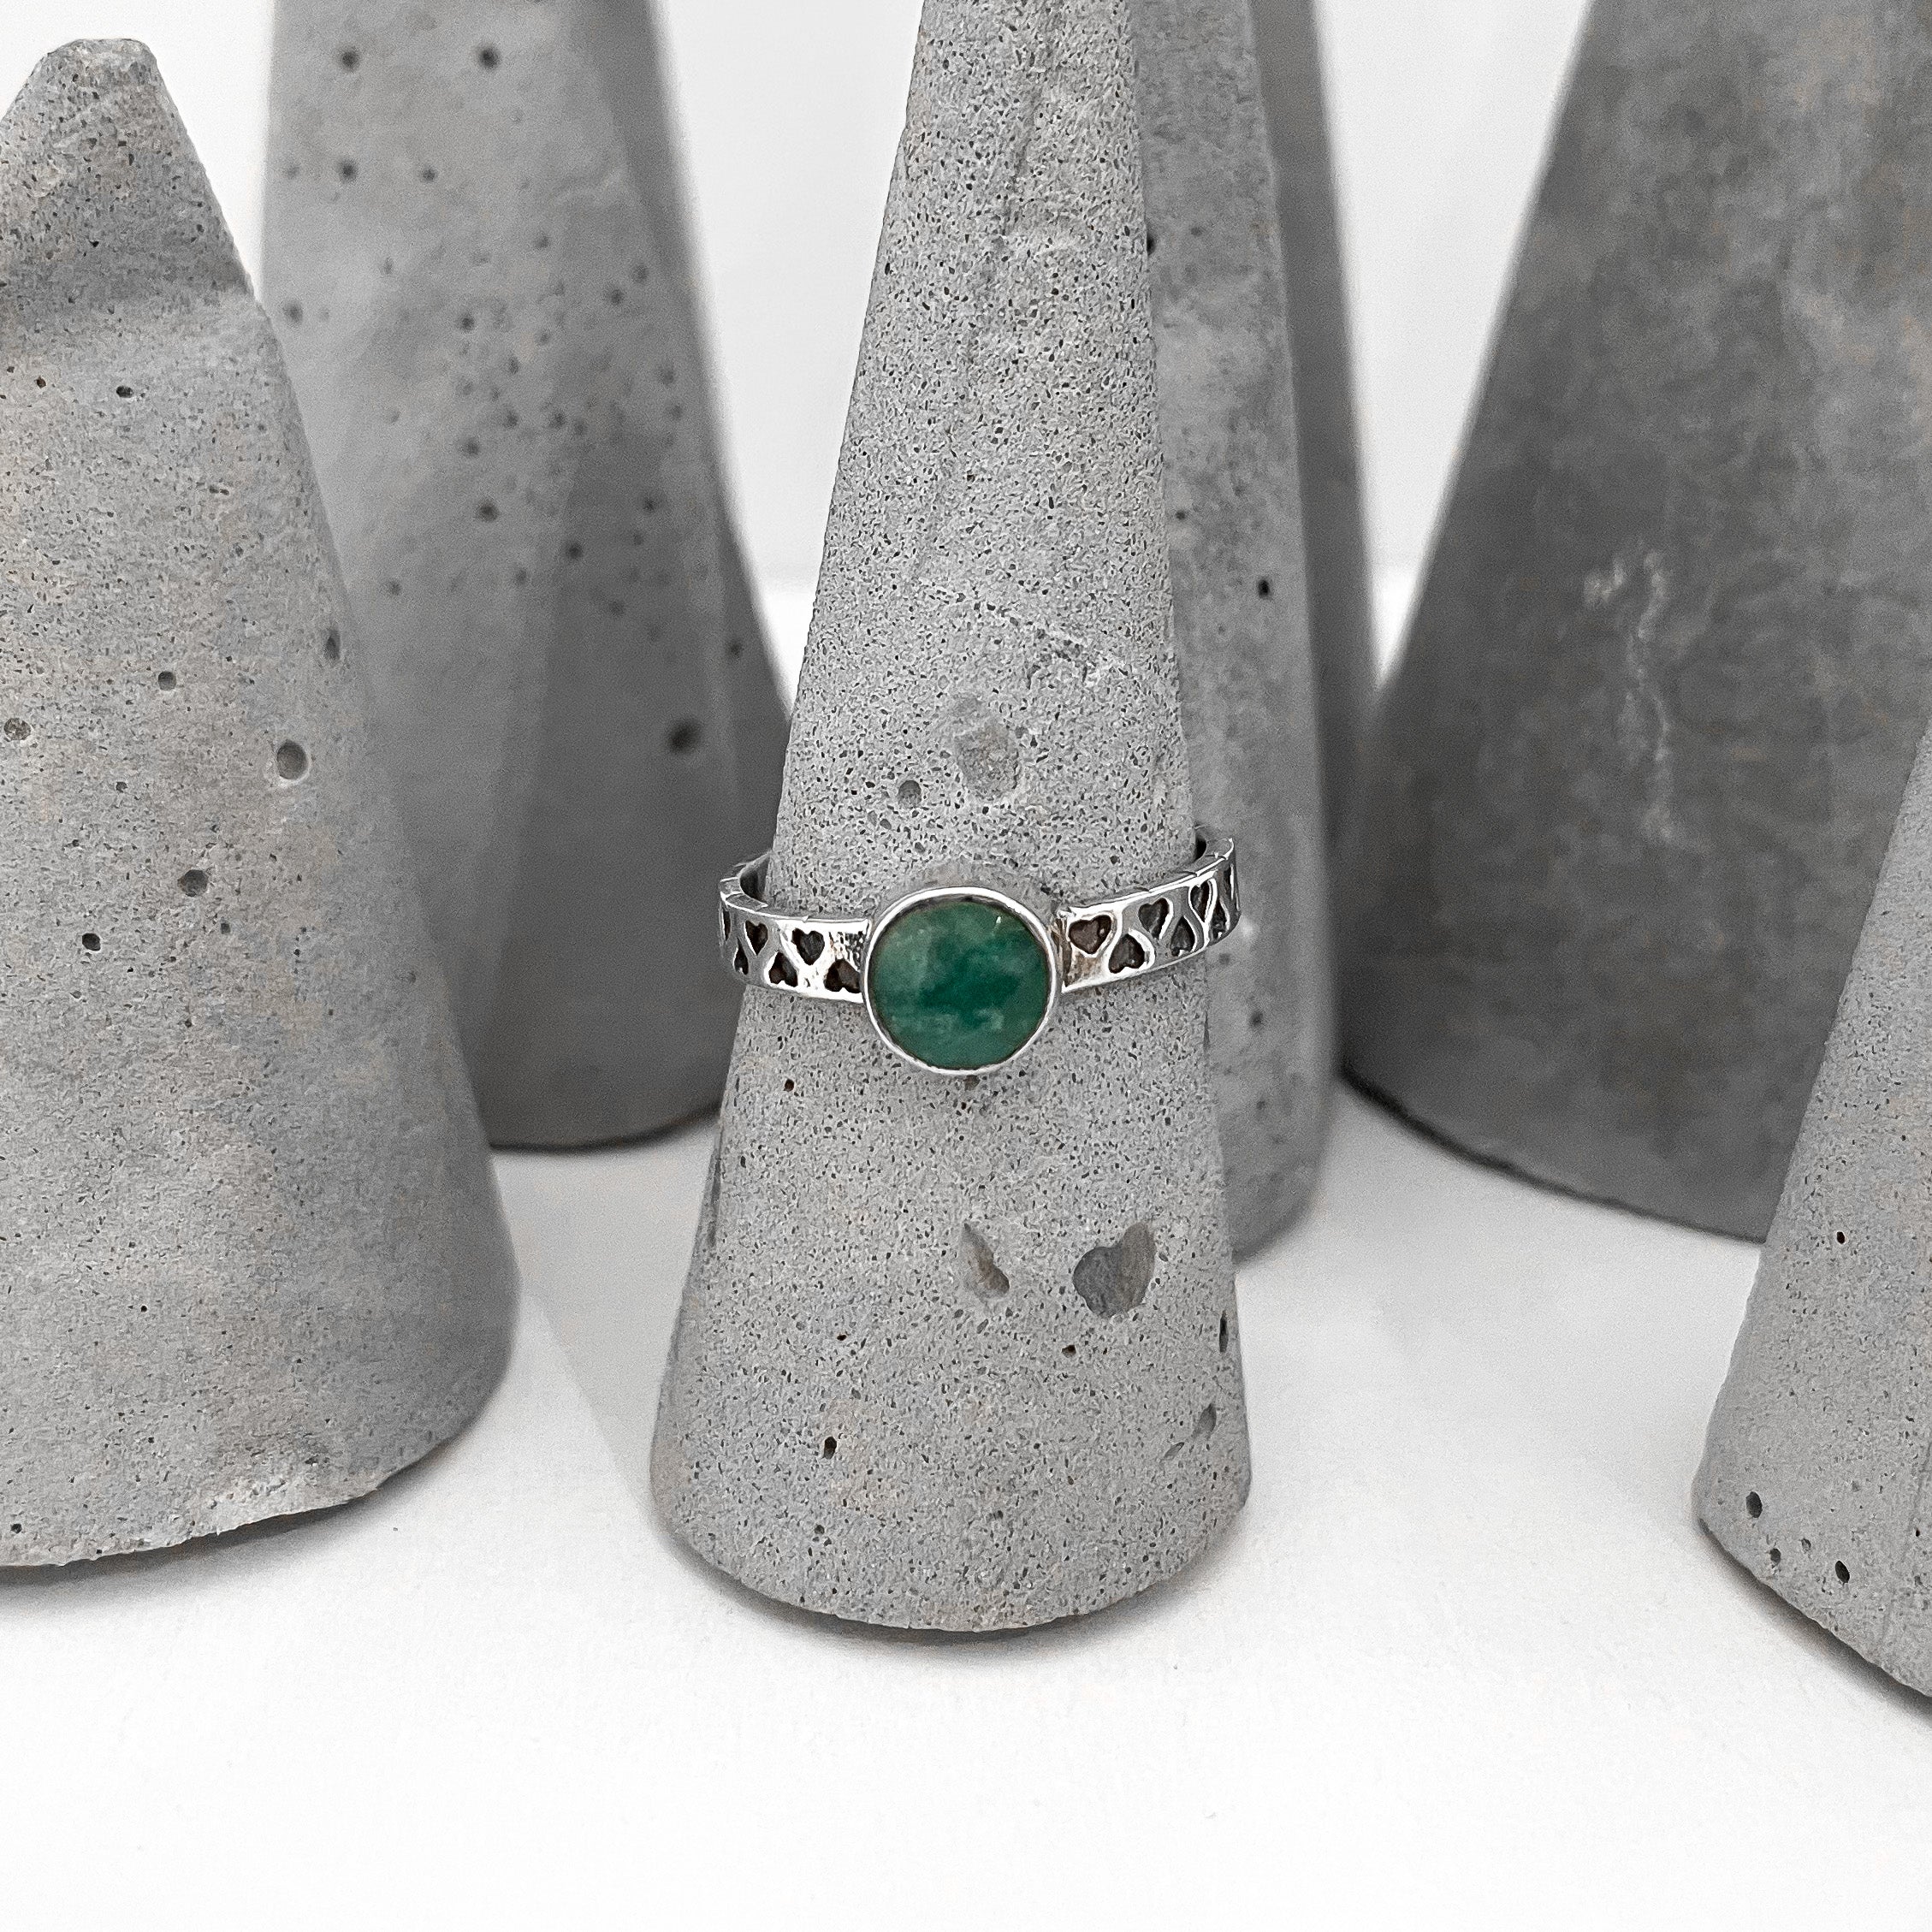 CIRCLE EMERALD W/ HEARTS AROUND THE BAND STERLING SILVER RING